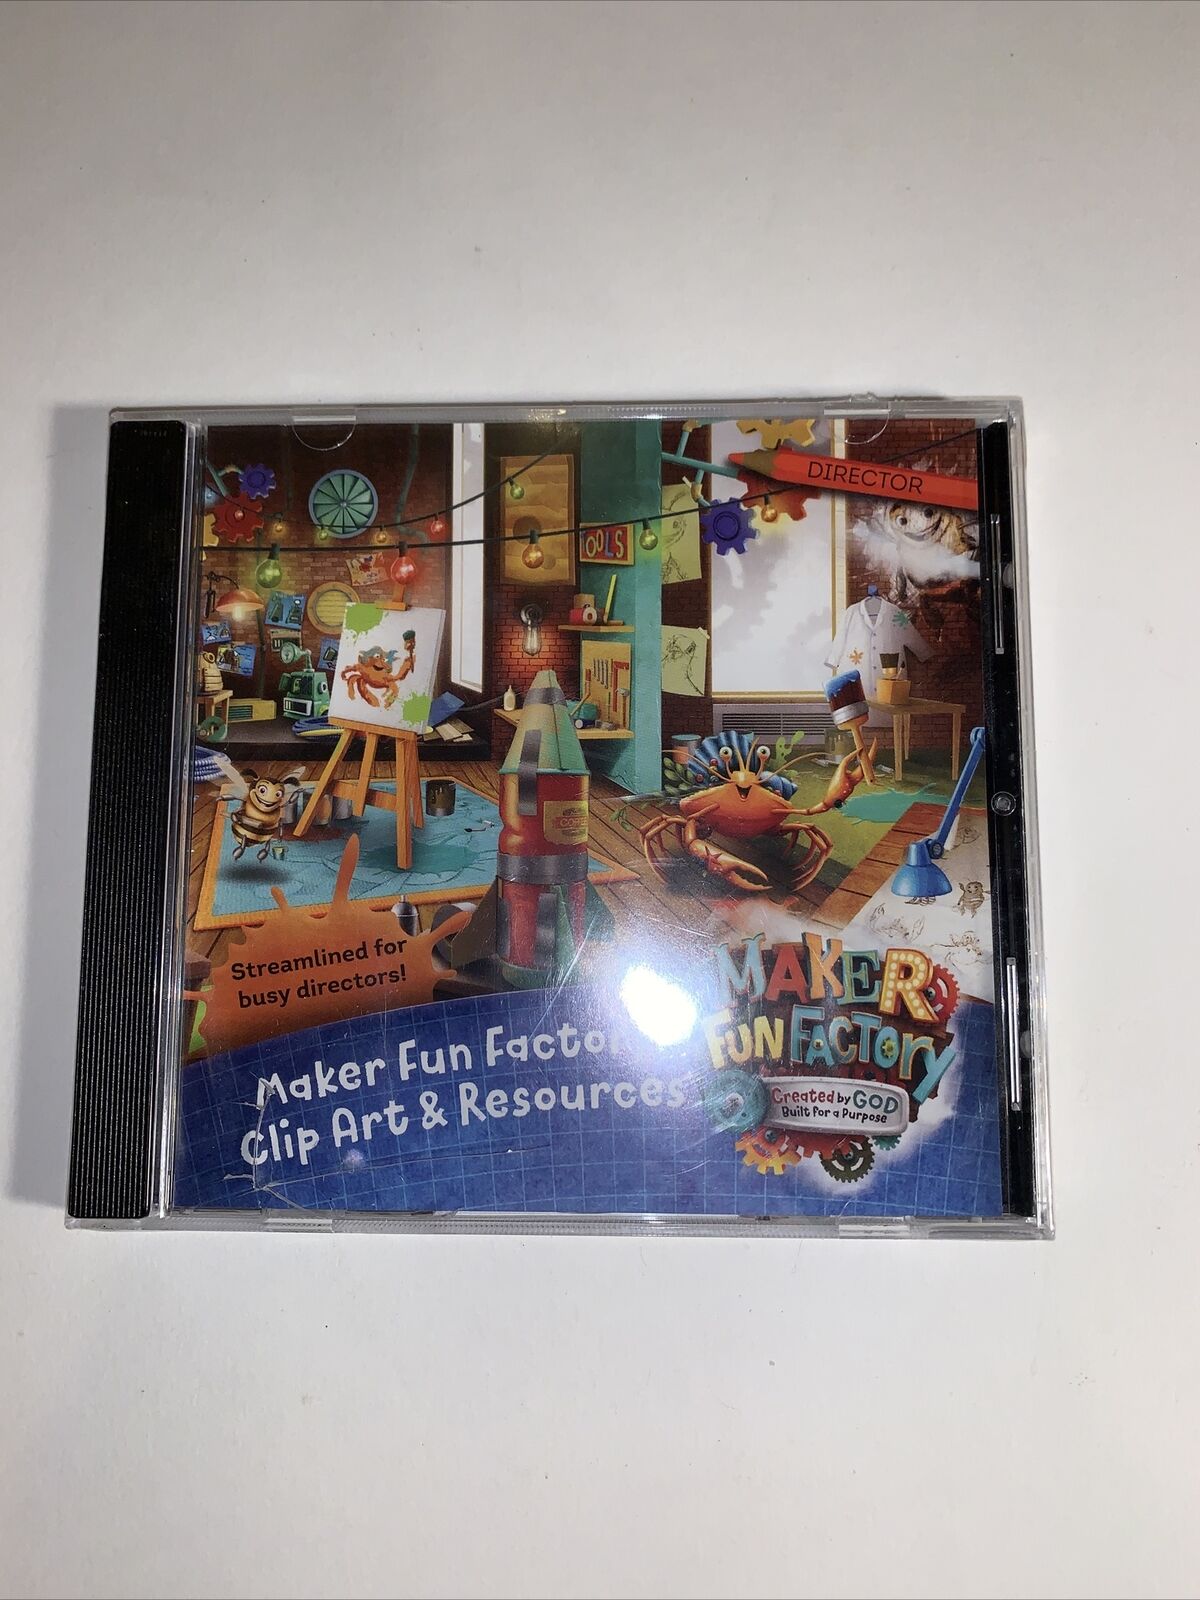 Maker Fun Factory Clip Art & Resources CD 2017-TESTED-RARE VINTAGE-SHIPS N 24 HR